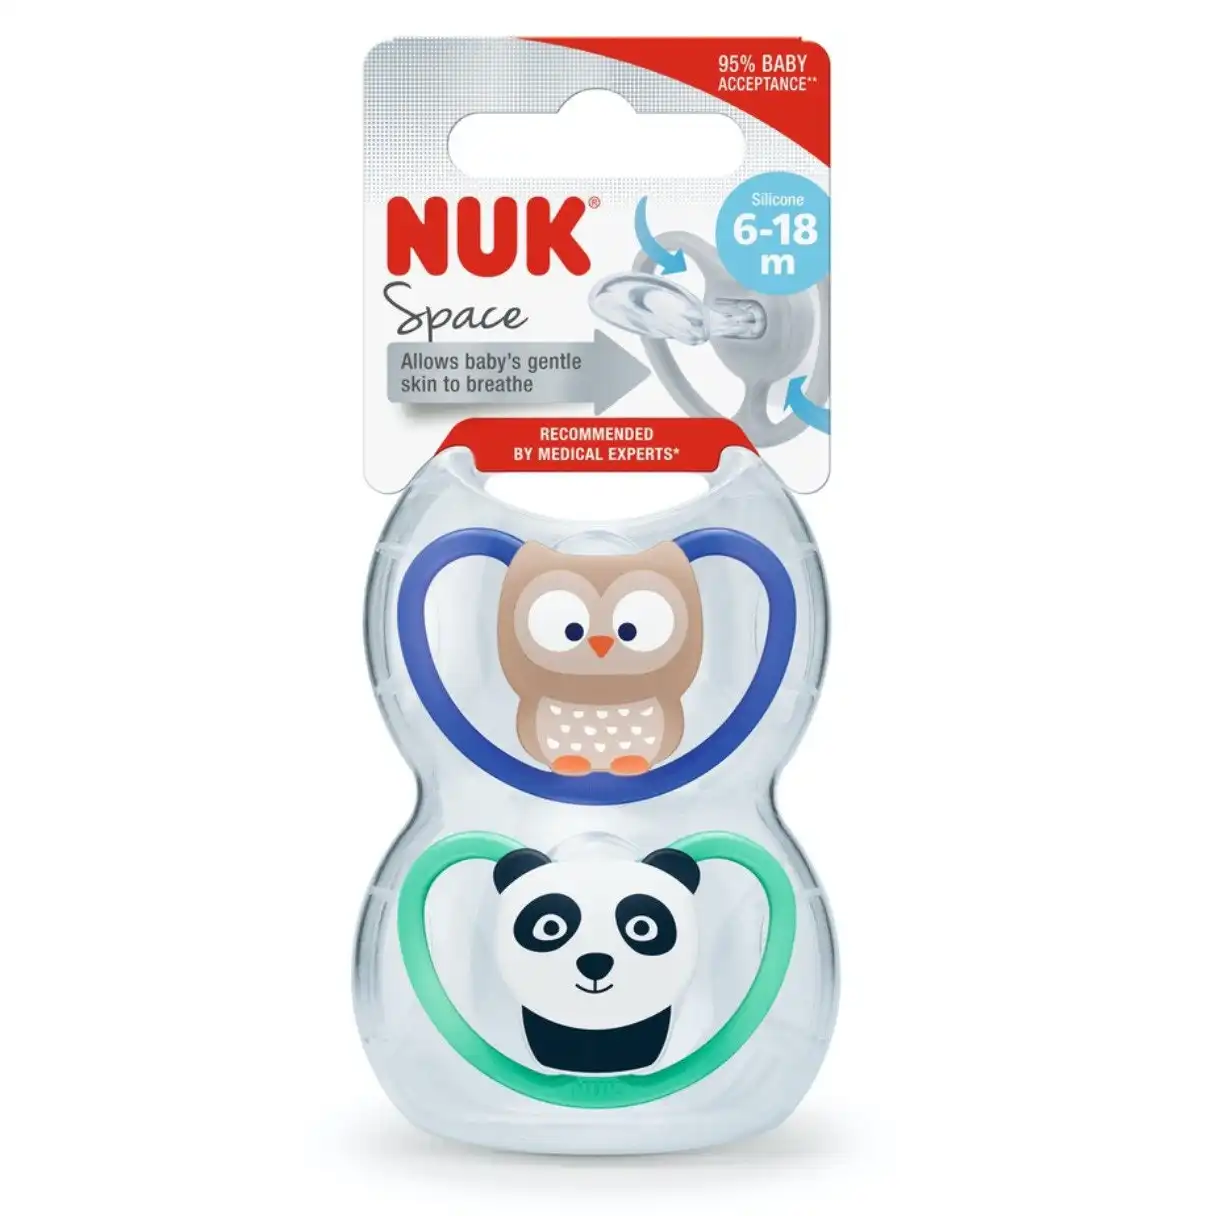 NUK Space Baby Dummy 6-18m, With Extra Ventilation, BPA-Free Silicone, 2 Pack - Assorted